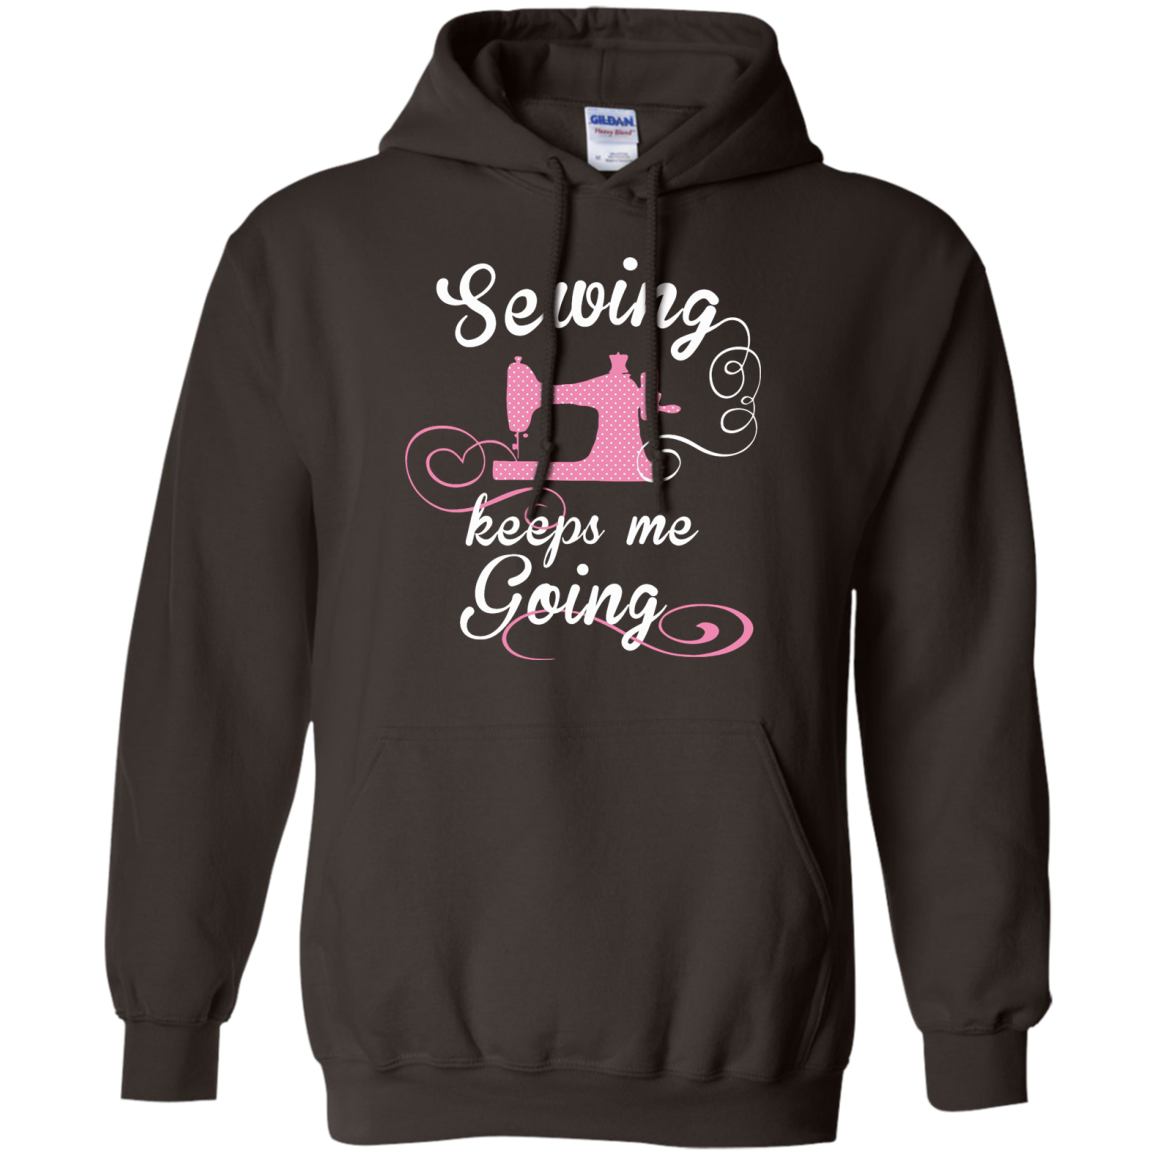 Sewing Keeps Me Going Pullover Hoodies - Crafter4Life - 4